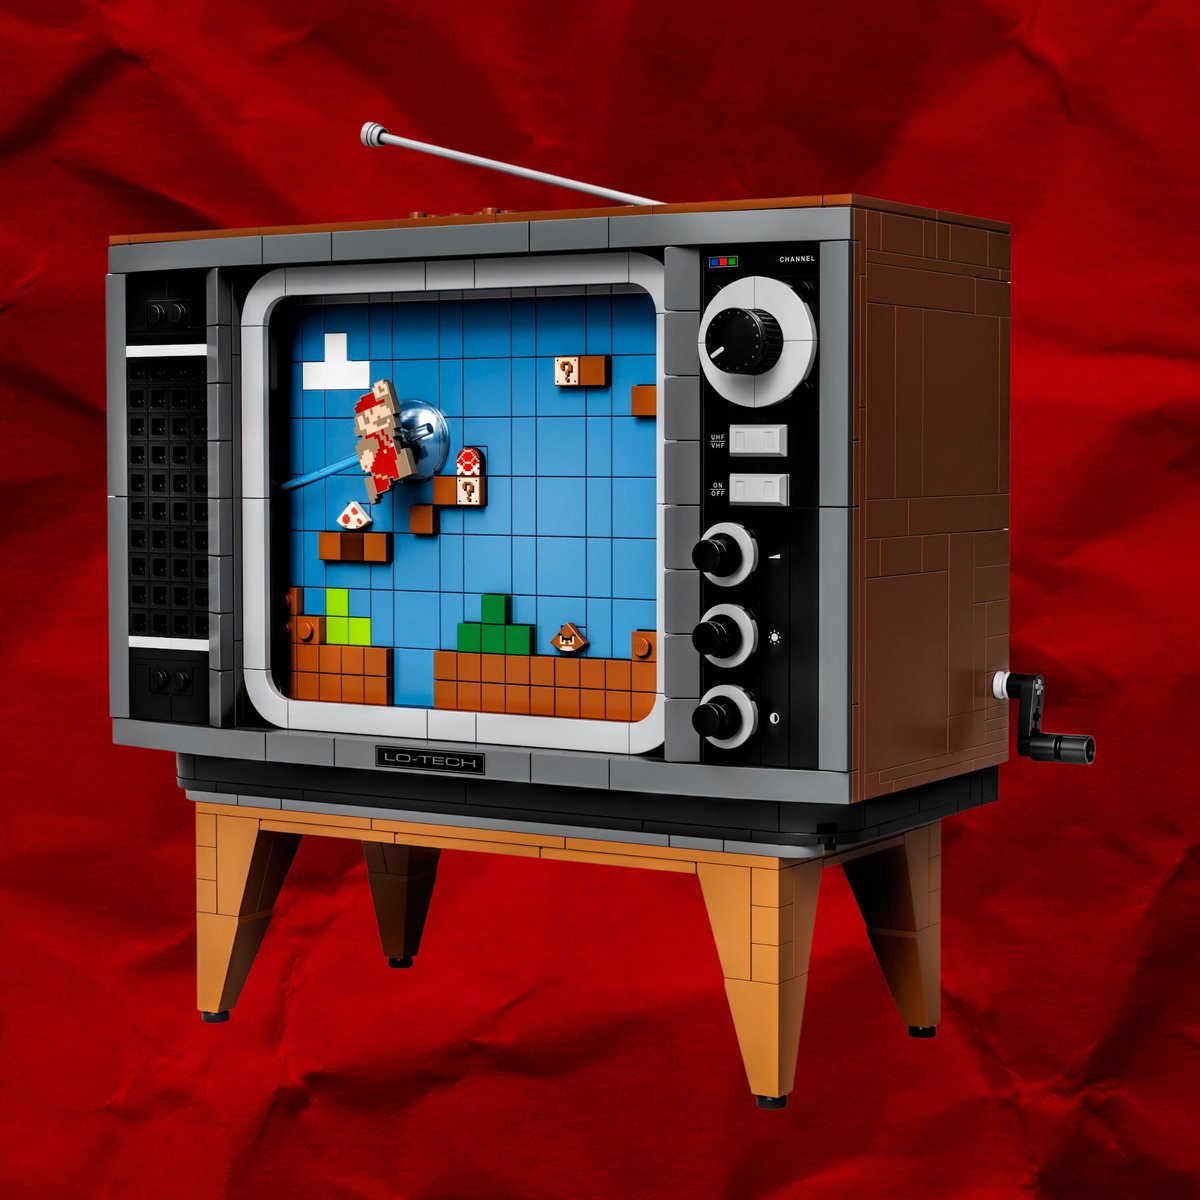 What's the most incredible 'function' in a LEGO set ... ever? We love the revolving screen that makes Mario 'hop' and run in 71374 Nintendo Entertainment System. #AFOL #Nintendo #ToyCollection